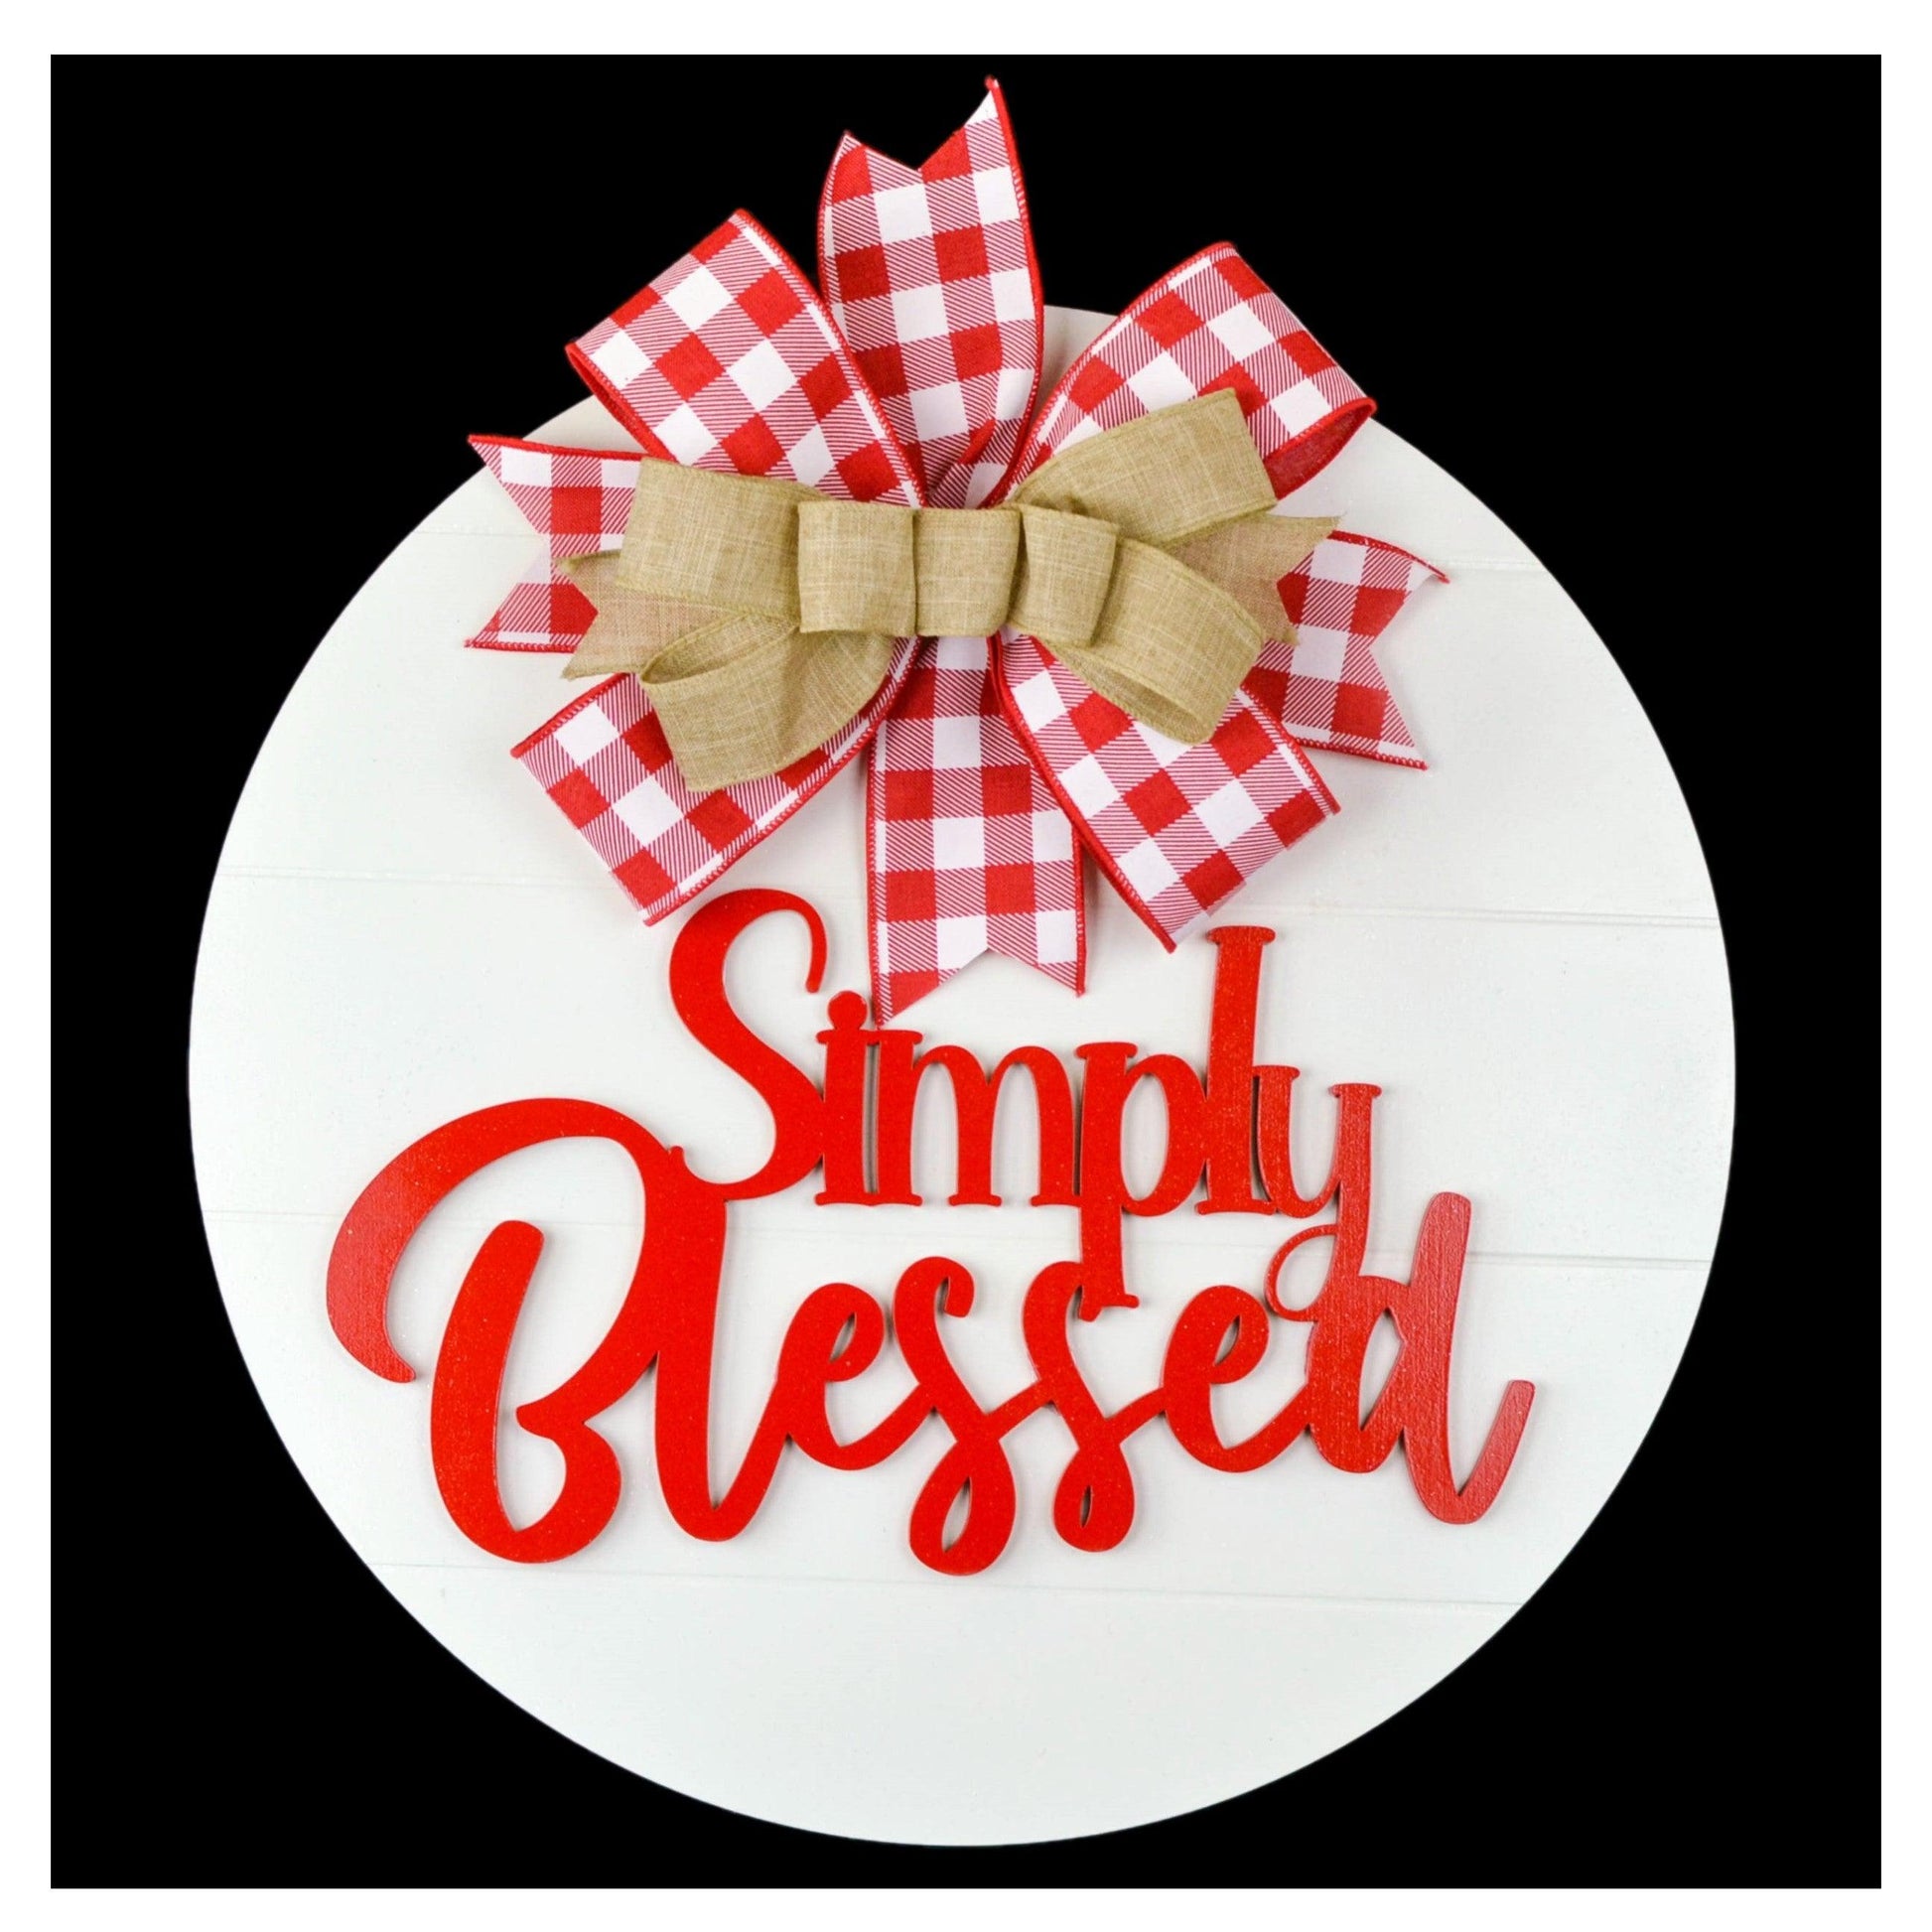 Simply Blessed Door Hanger - Farmhouse Shiplap Round Front Porch Decor - Buffalo Plaid White Black - Pink Door Wreaths